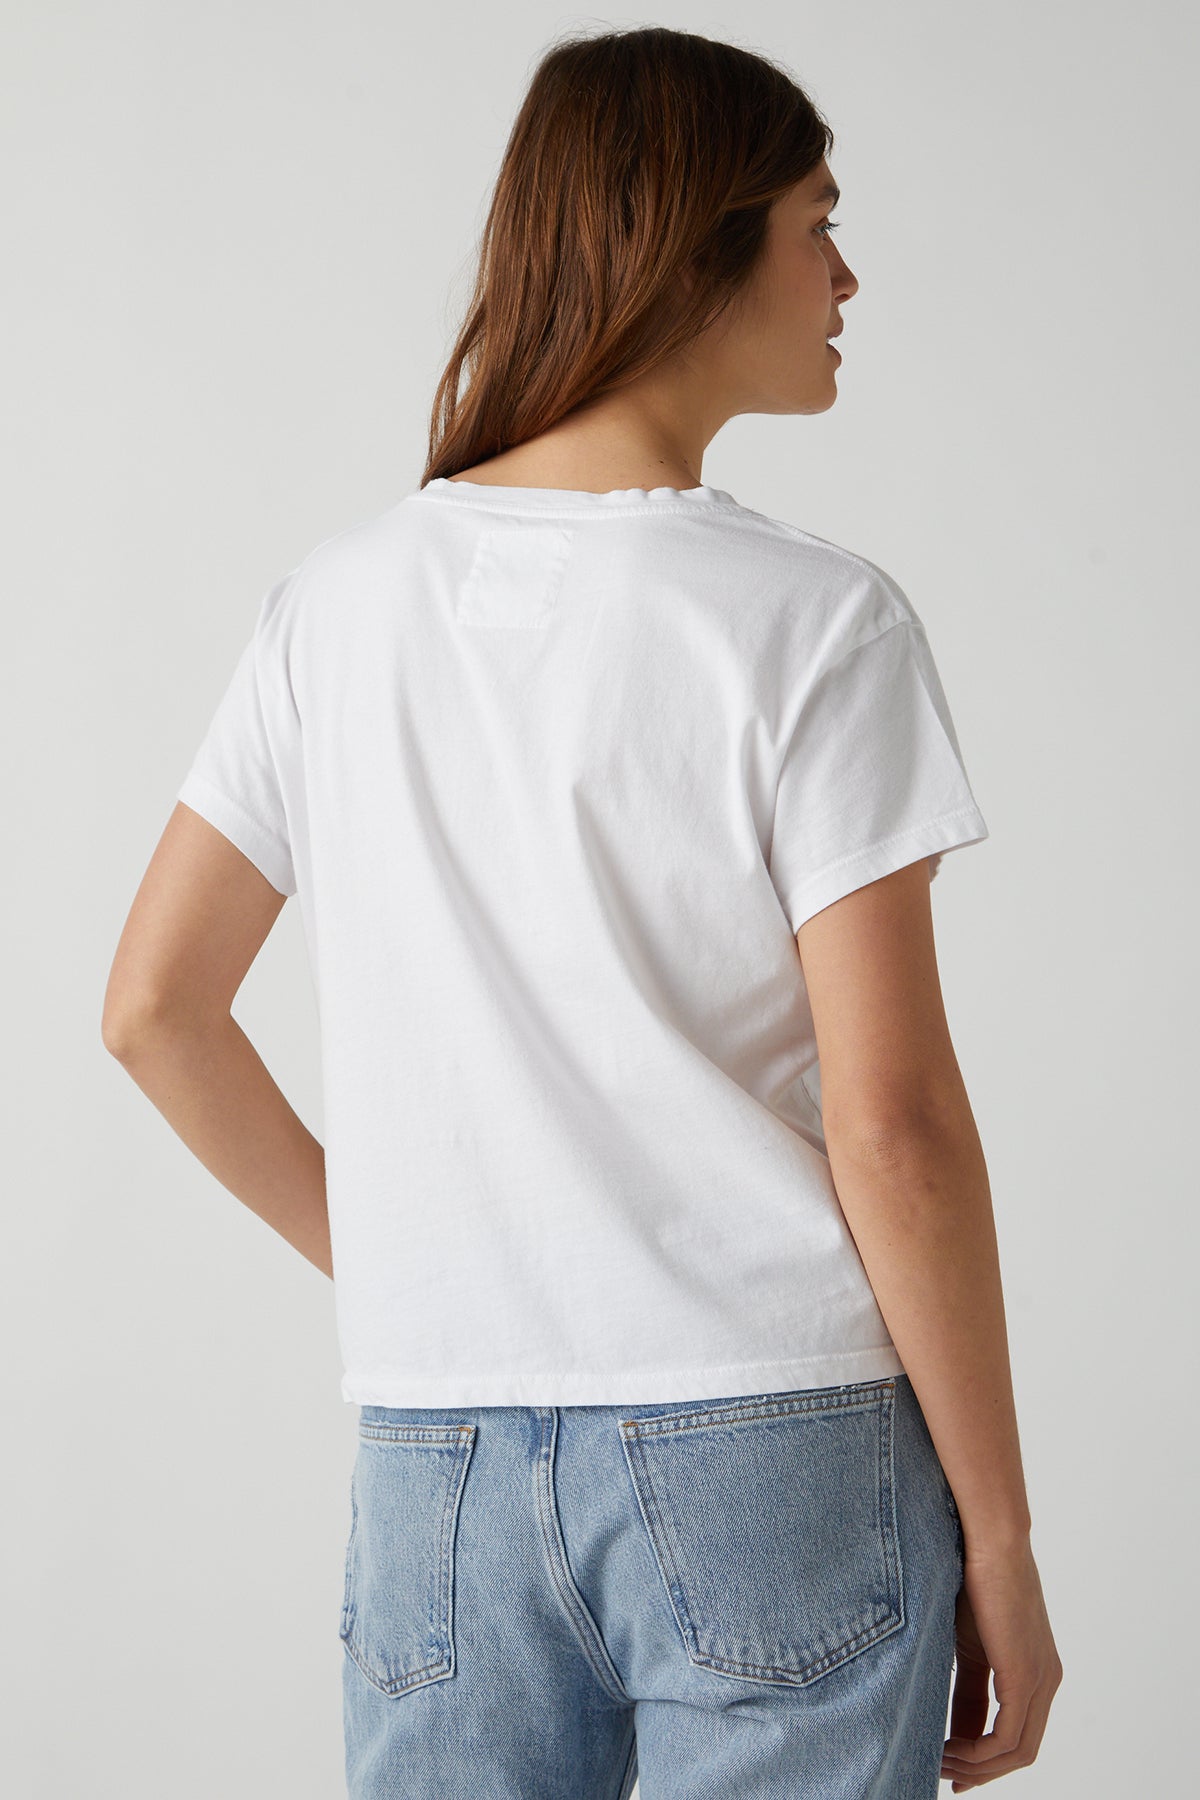 the back view of a woman wearing a Velvet by Jenny Graham VENICE TEE and jeans.-25484403048641